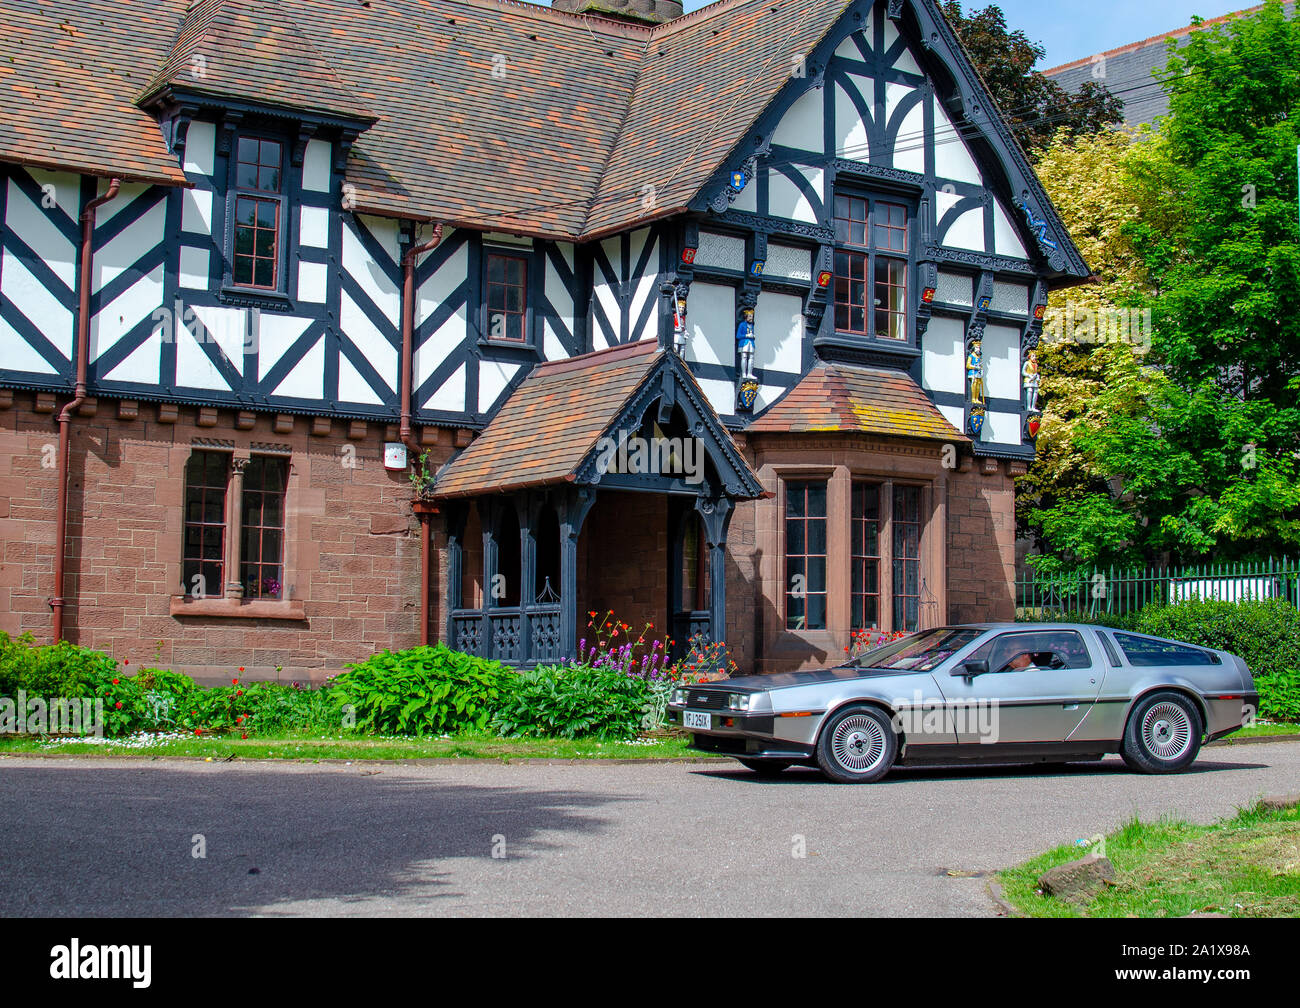 The classic DMC DeLorean car passing by a beautiful english Tudor style house called the Lodge. 'Brums and Buns' retro cars festival at Chester. Stock Photo